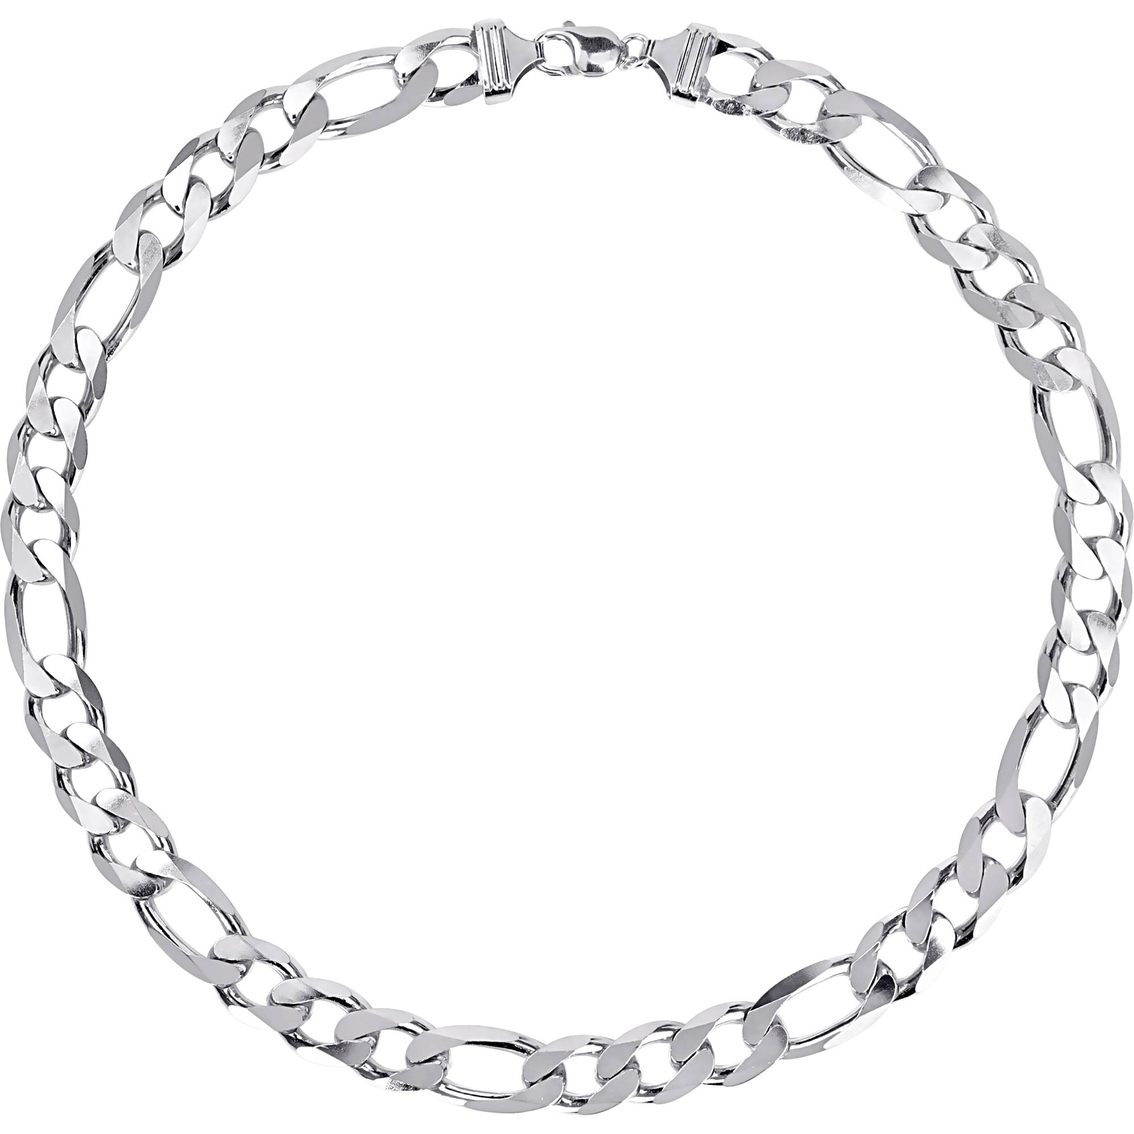 Sofia B. Sterling Silver 14.5mm Figaro Chain Necklace - Image 3 of 4